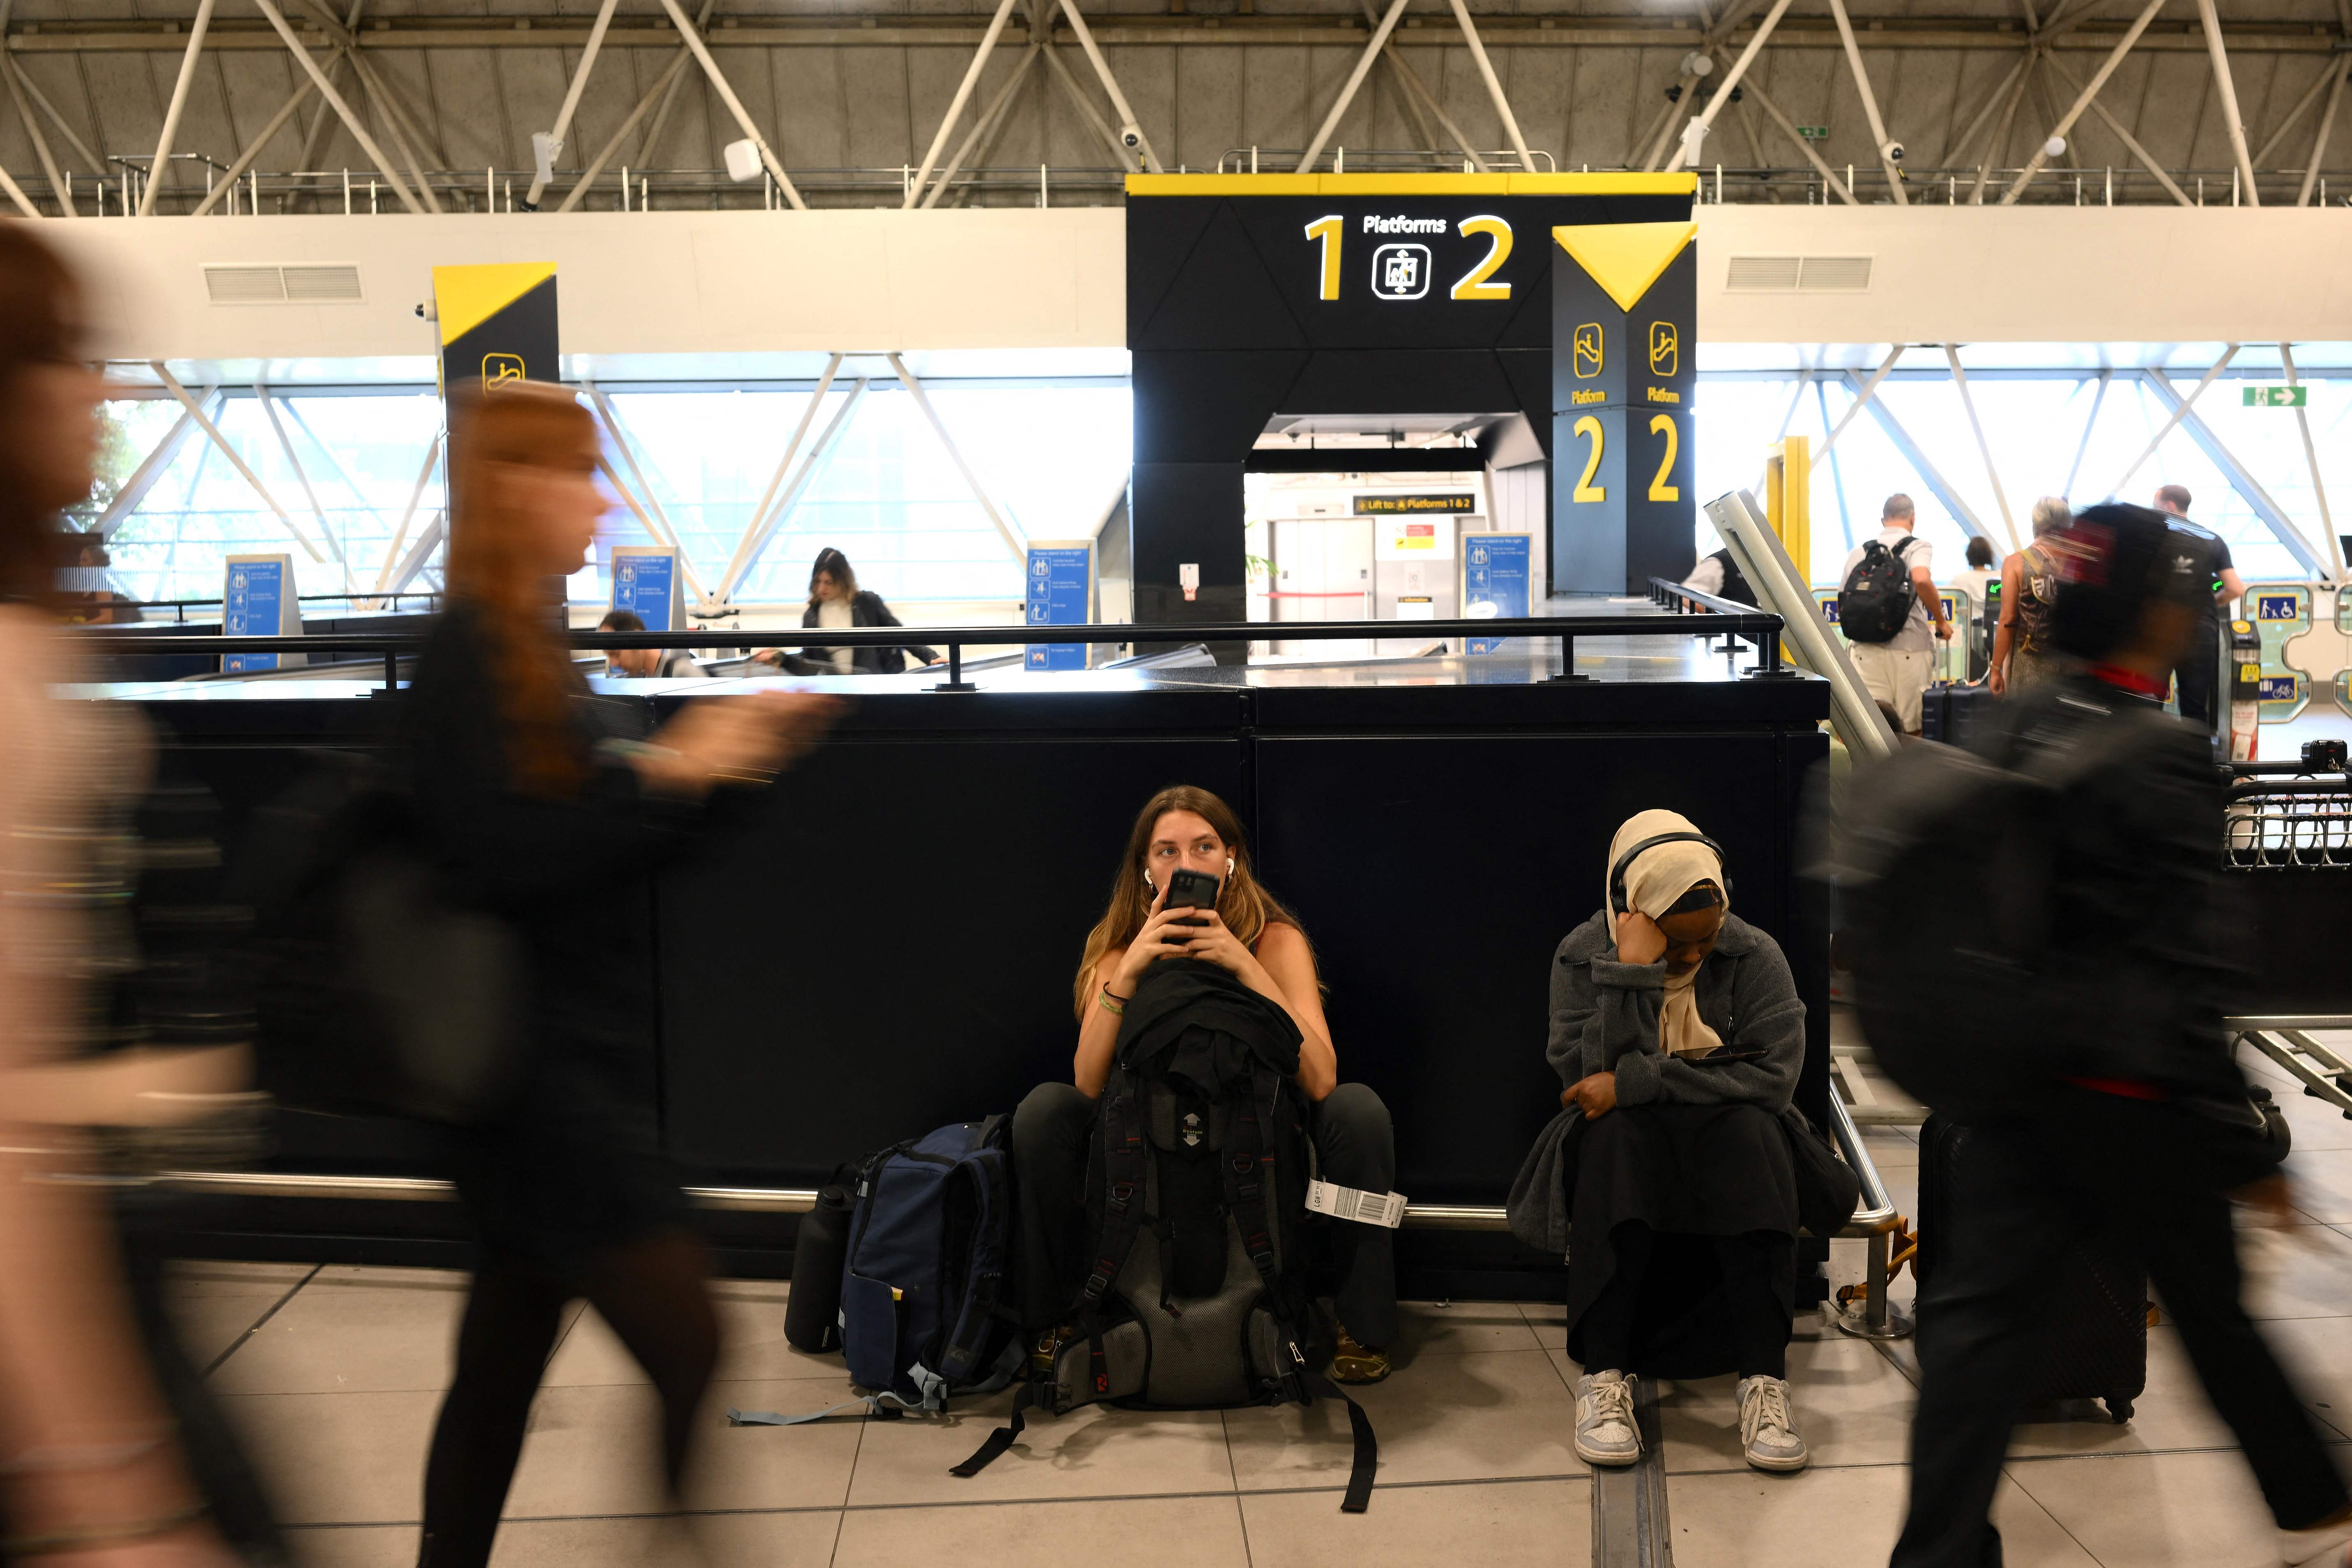 It was a waiting game for many passengers at British airports